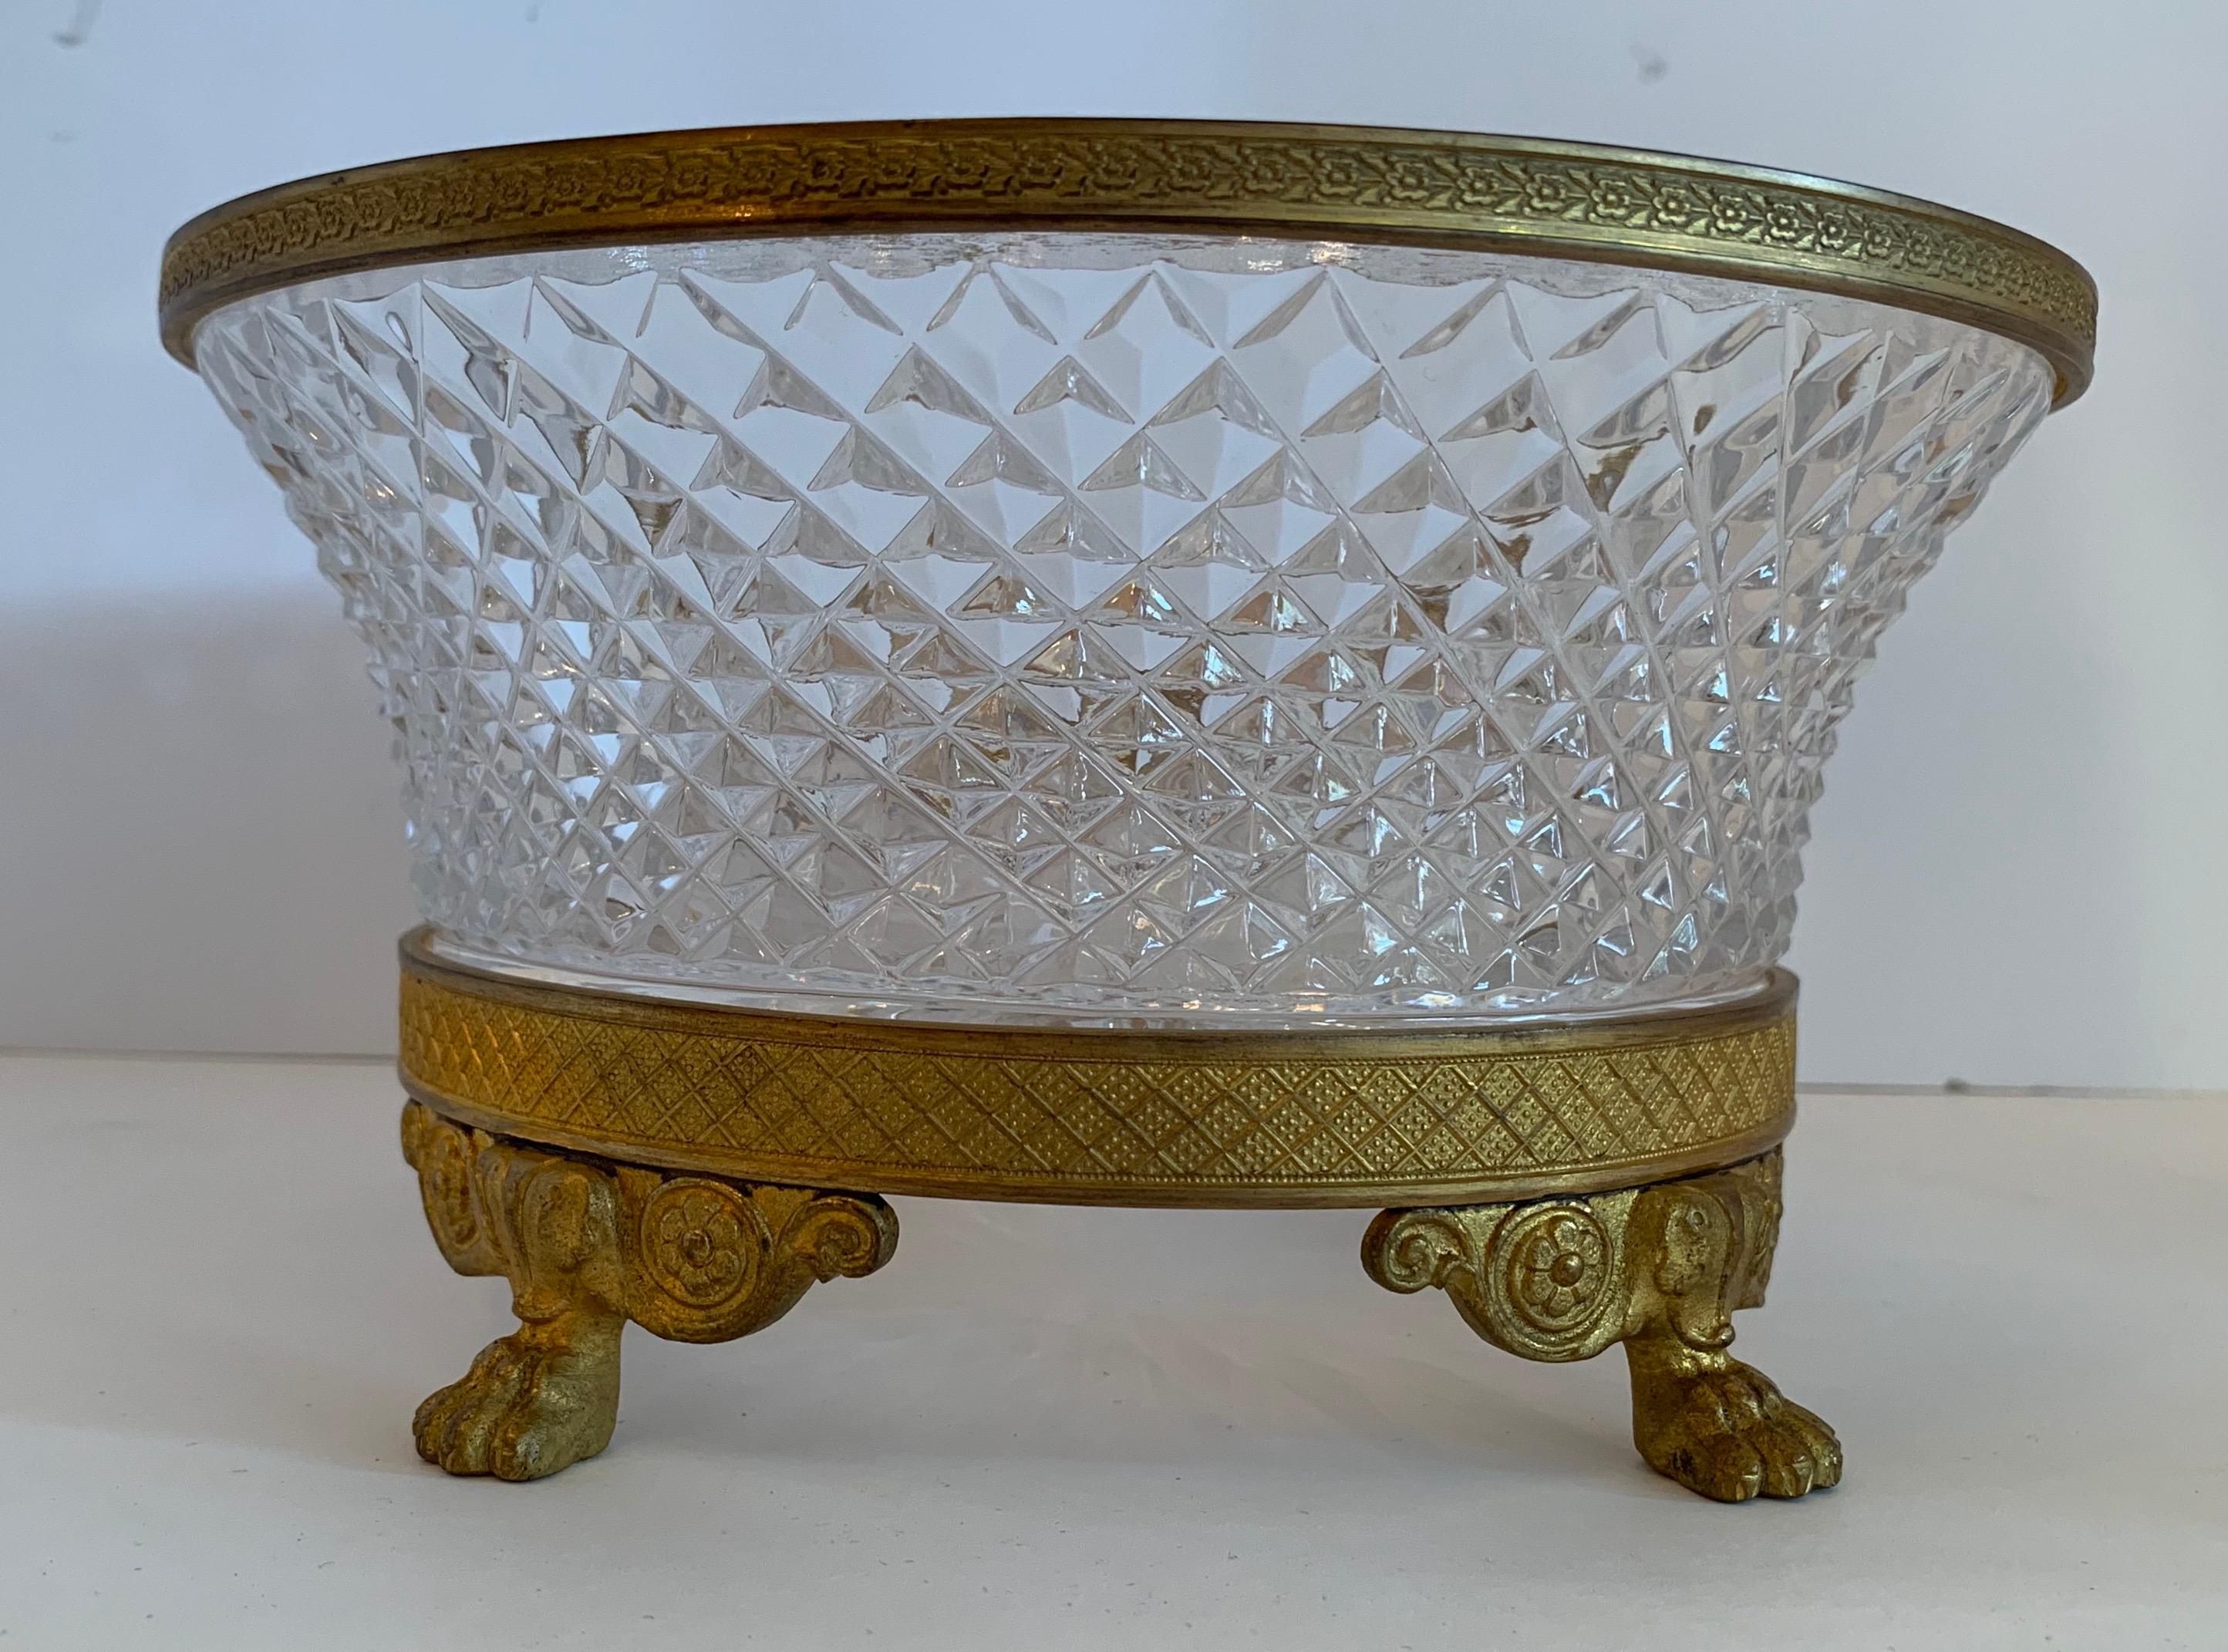 Wonderful French Empire Gilt Doré Bronze & Cut Crystal Round Centerpiece Bowl In Good Condition For Sale In Roslyn, NY